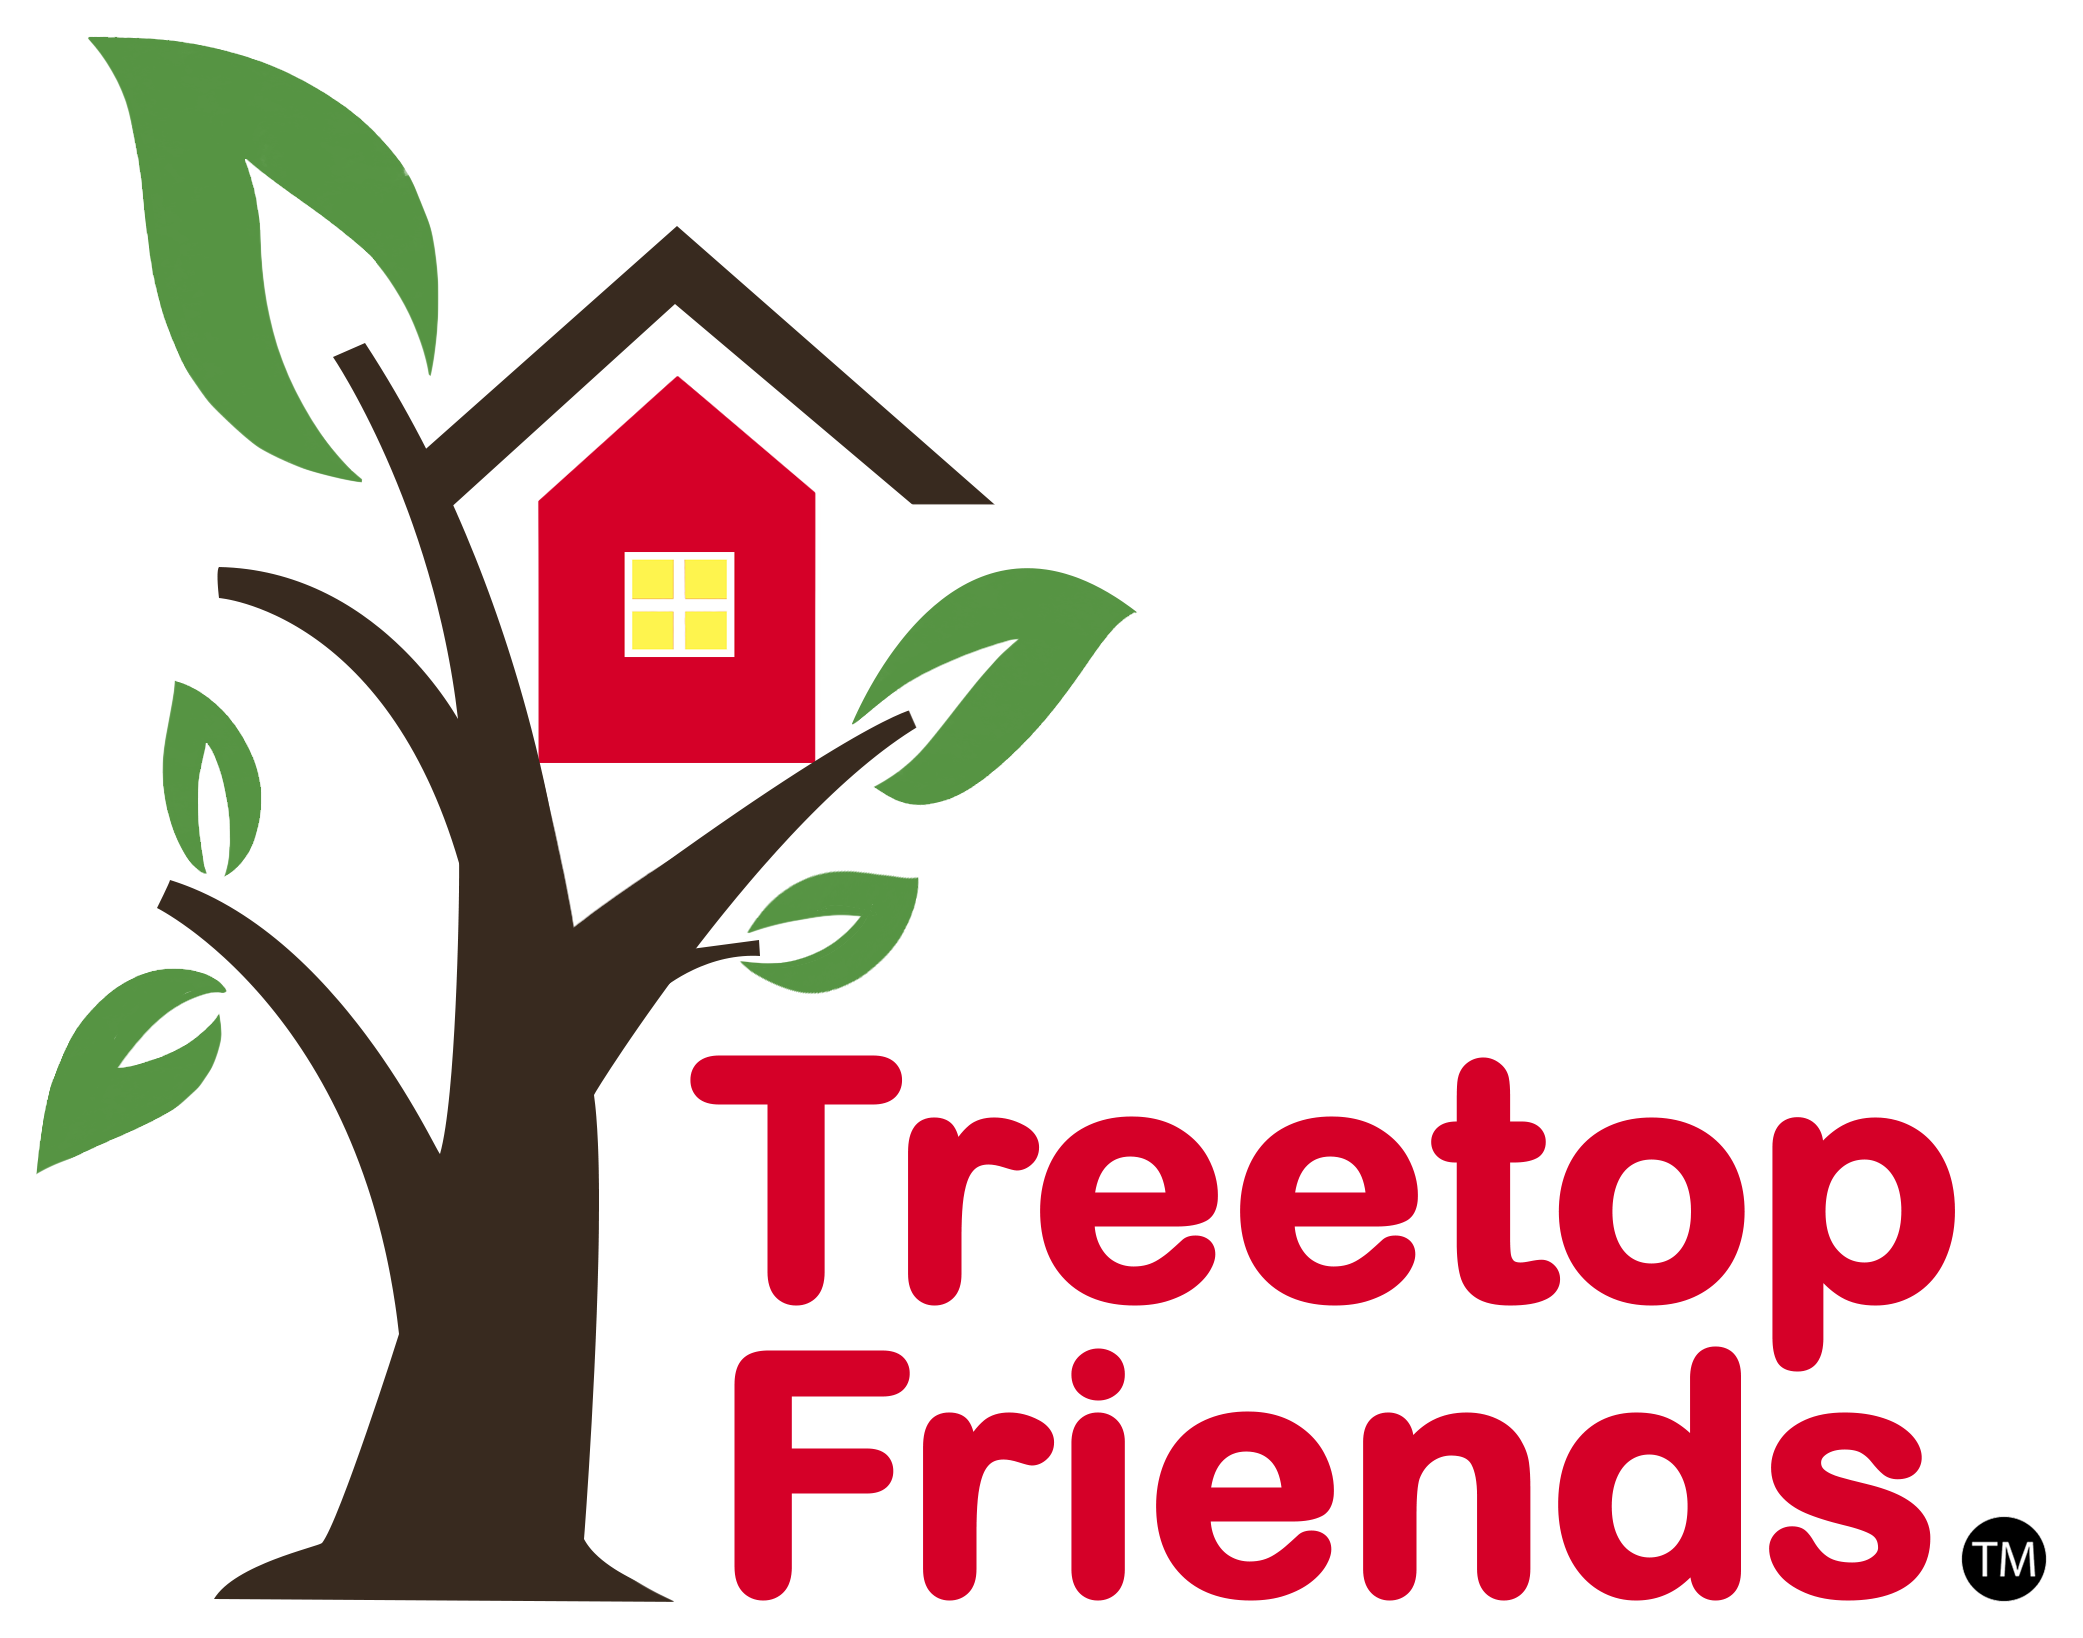 About Treetop Friends